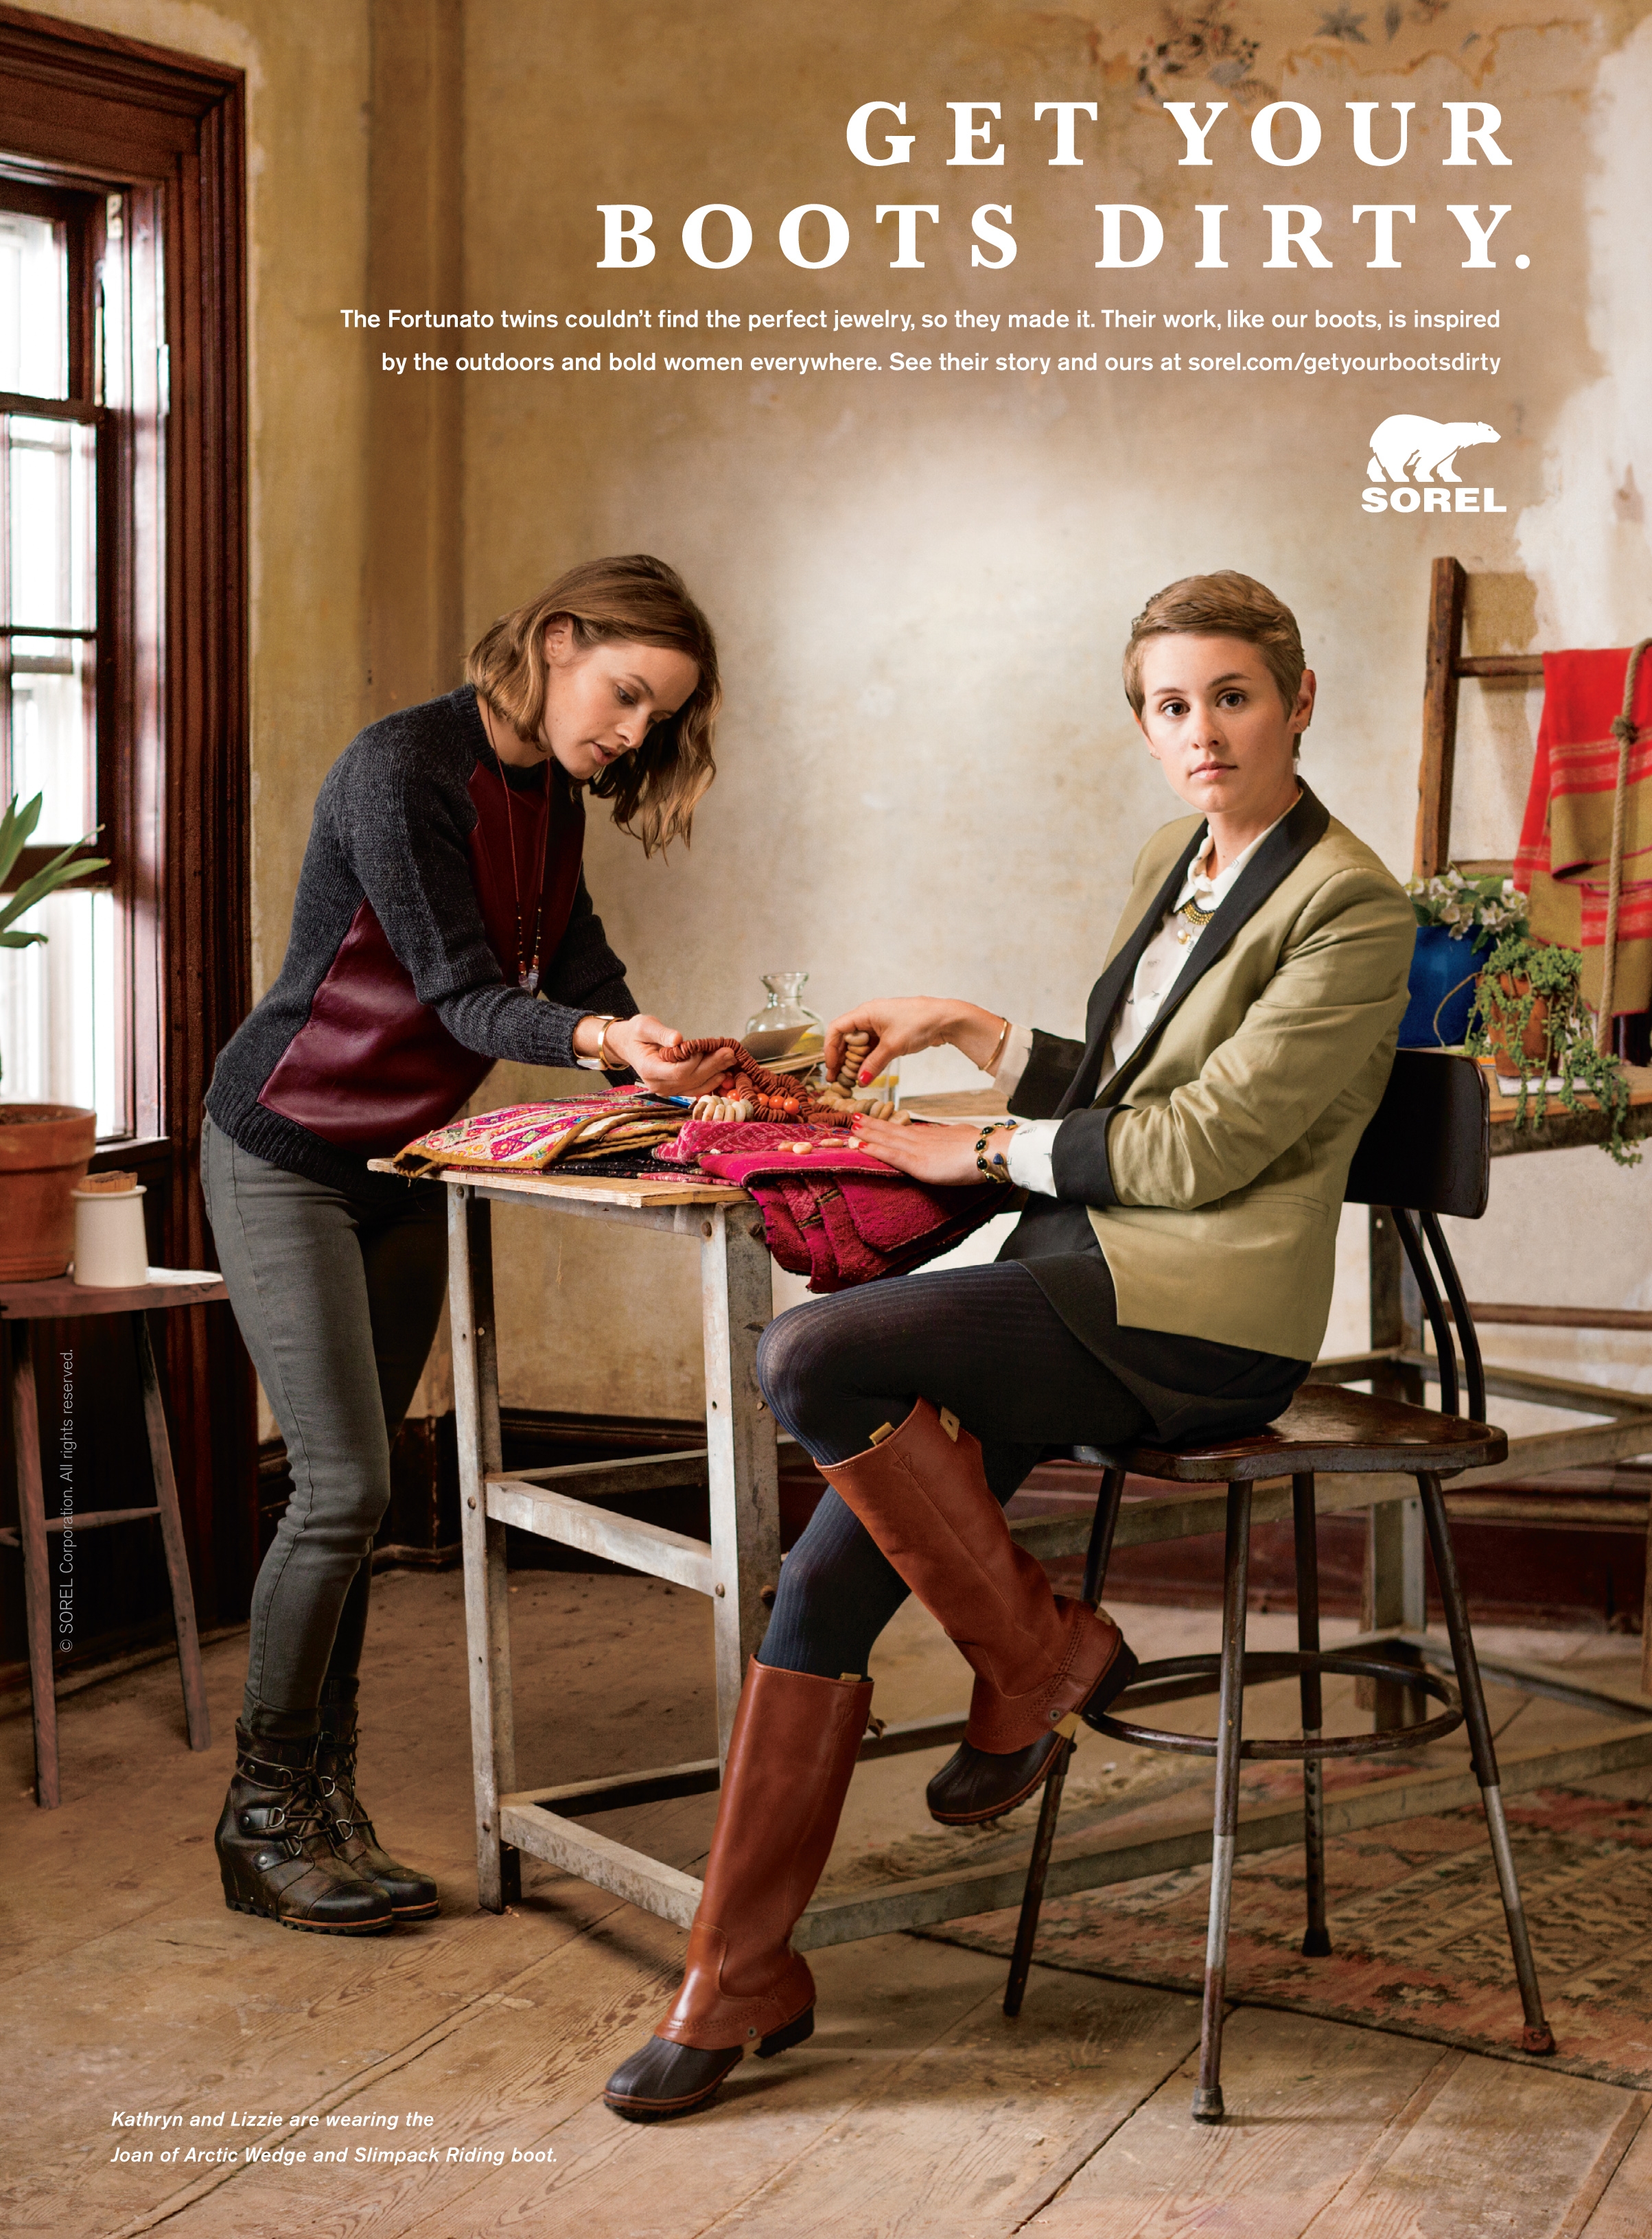 SOREL® 2013 “Get Your Boots Dirty” Campaign and SORELstyle Video Series Real, Inspirational Women | Business Wire